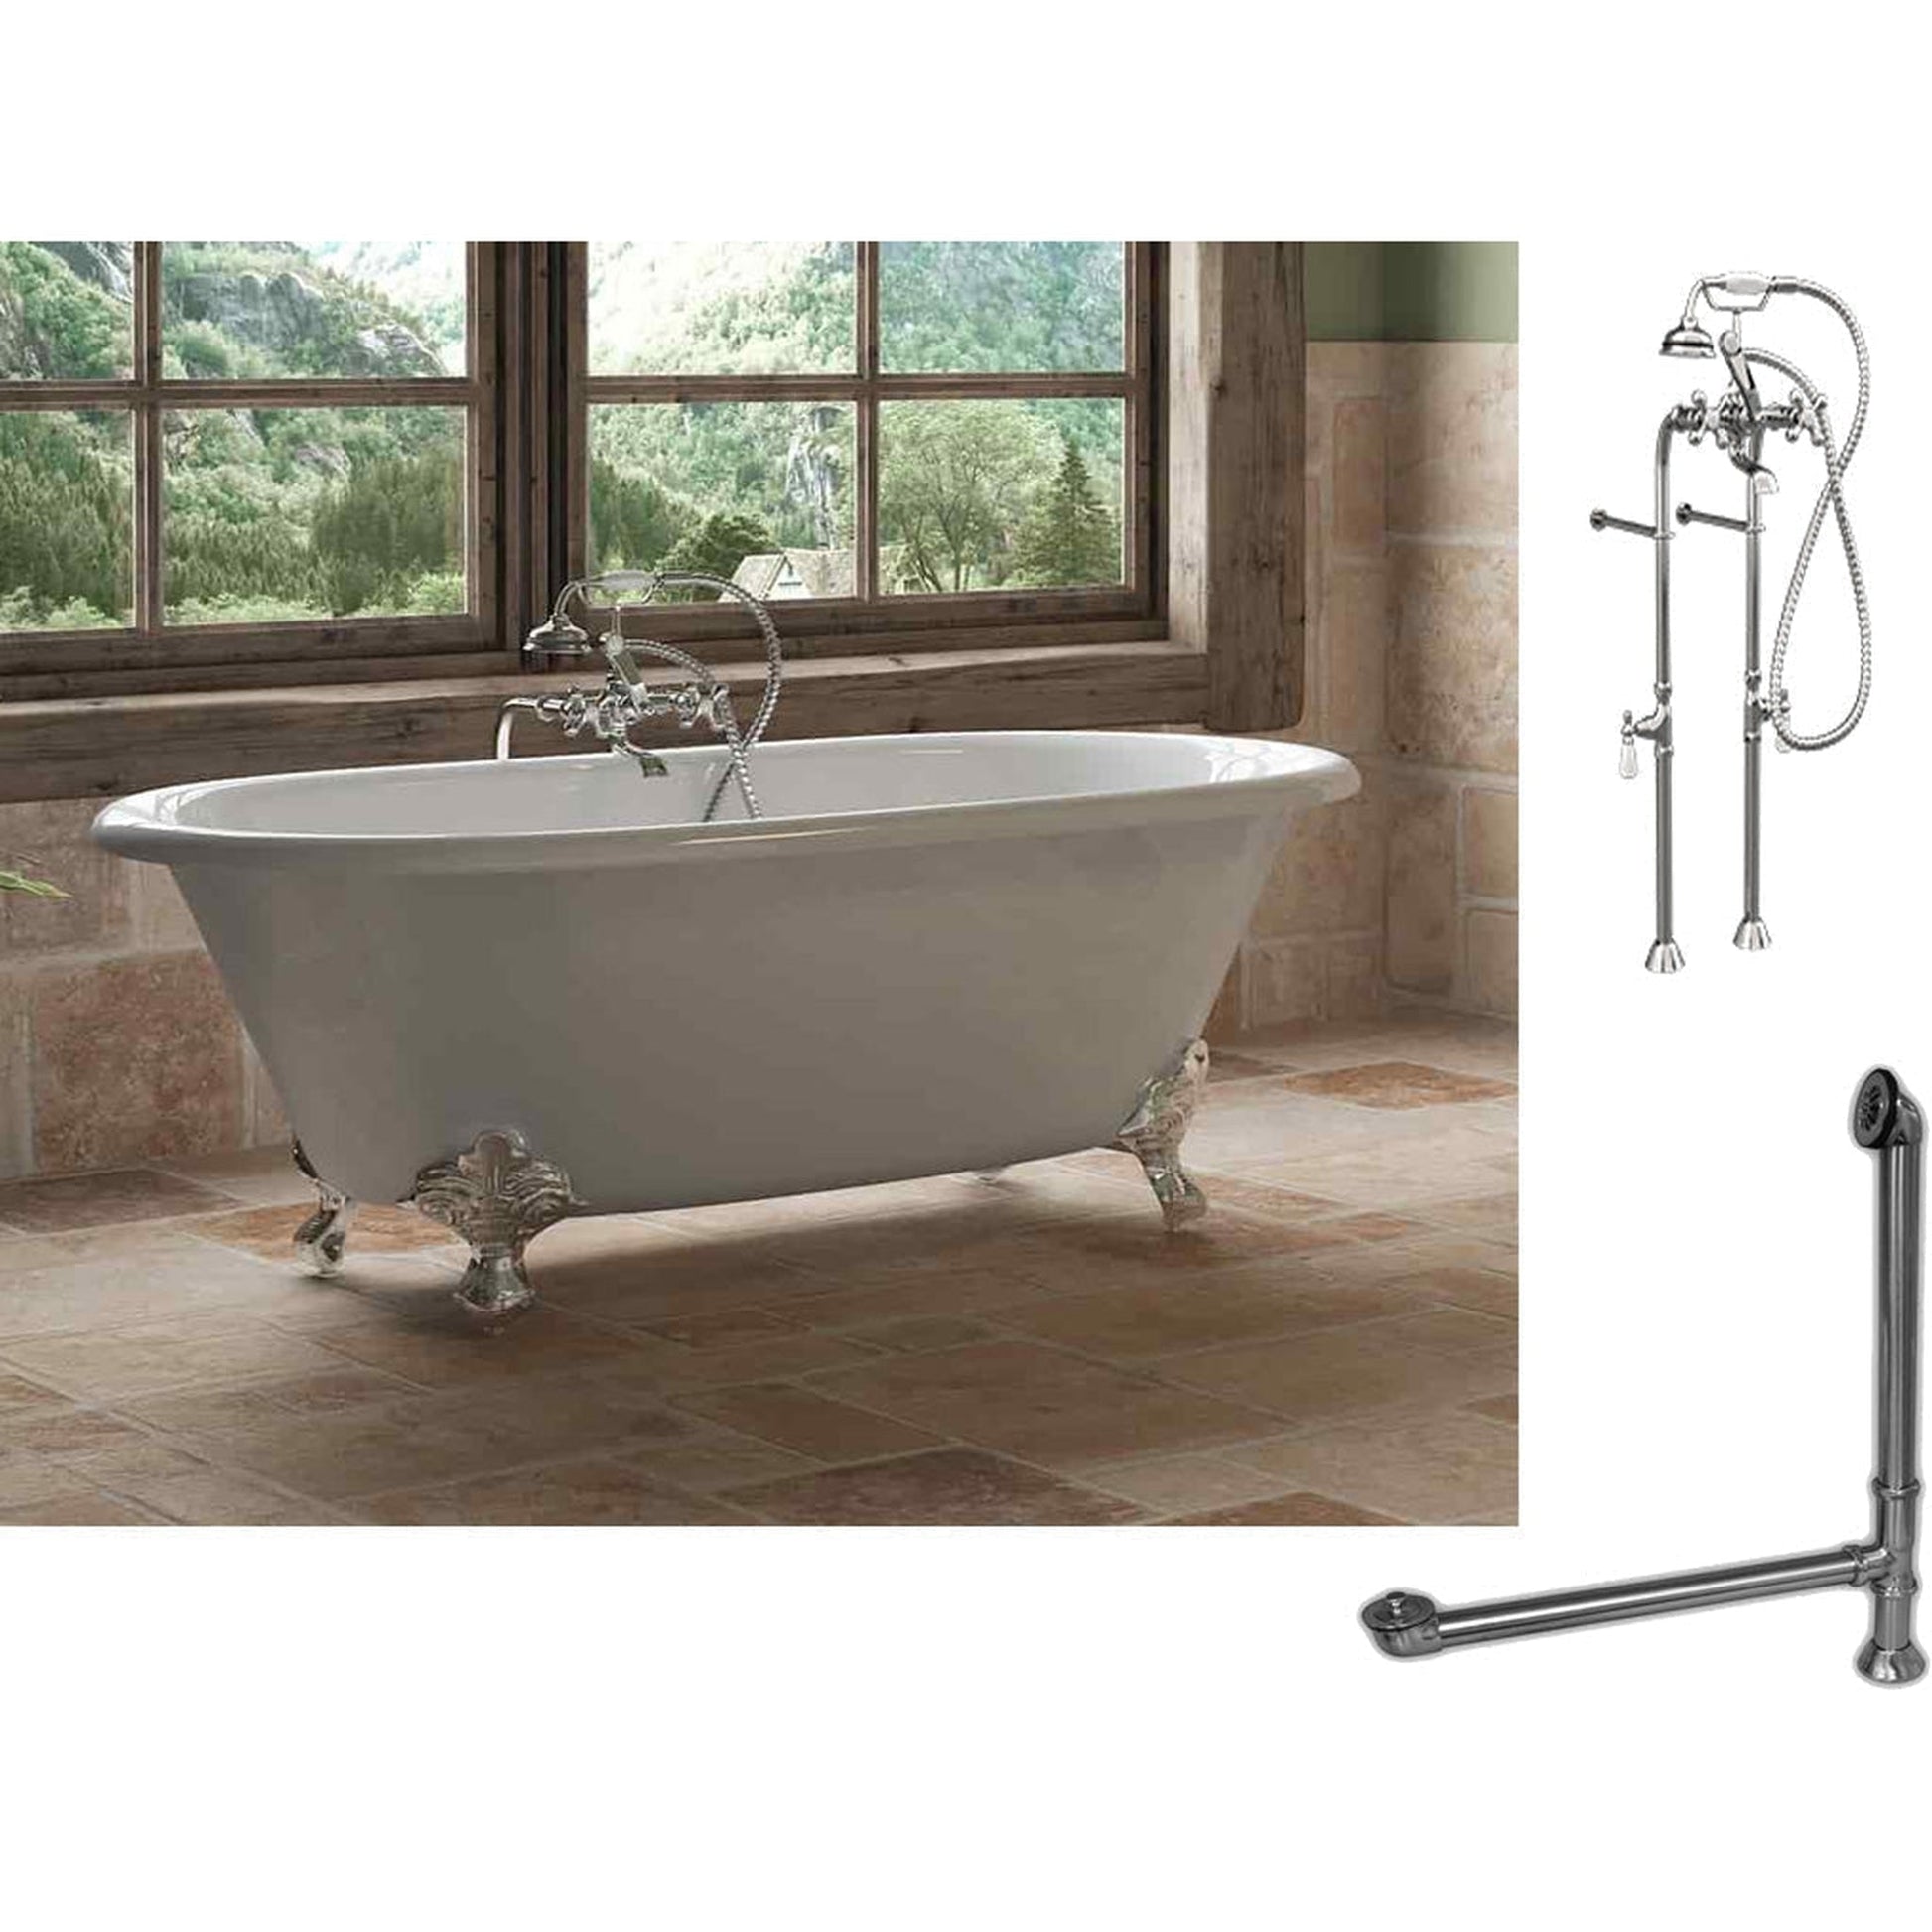 Cambridge Plumbing 67" White Cast Iron Double Ended Clawfoot Bathtub With No Deck Holes And Complete Plumbing Package Including Floor Mounted British Telephone Faucet, Drain And Overflow Assembly In Polished Chrome